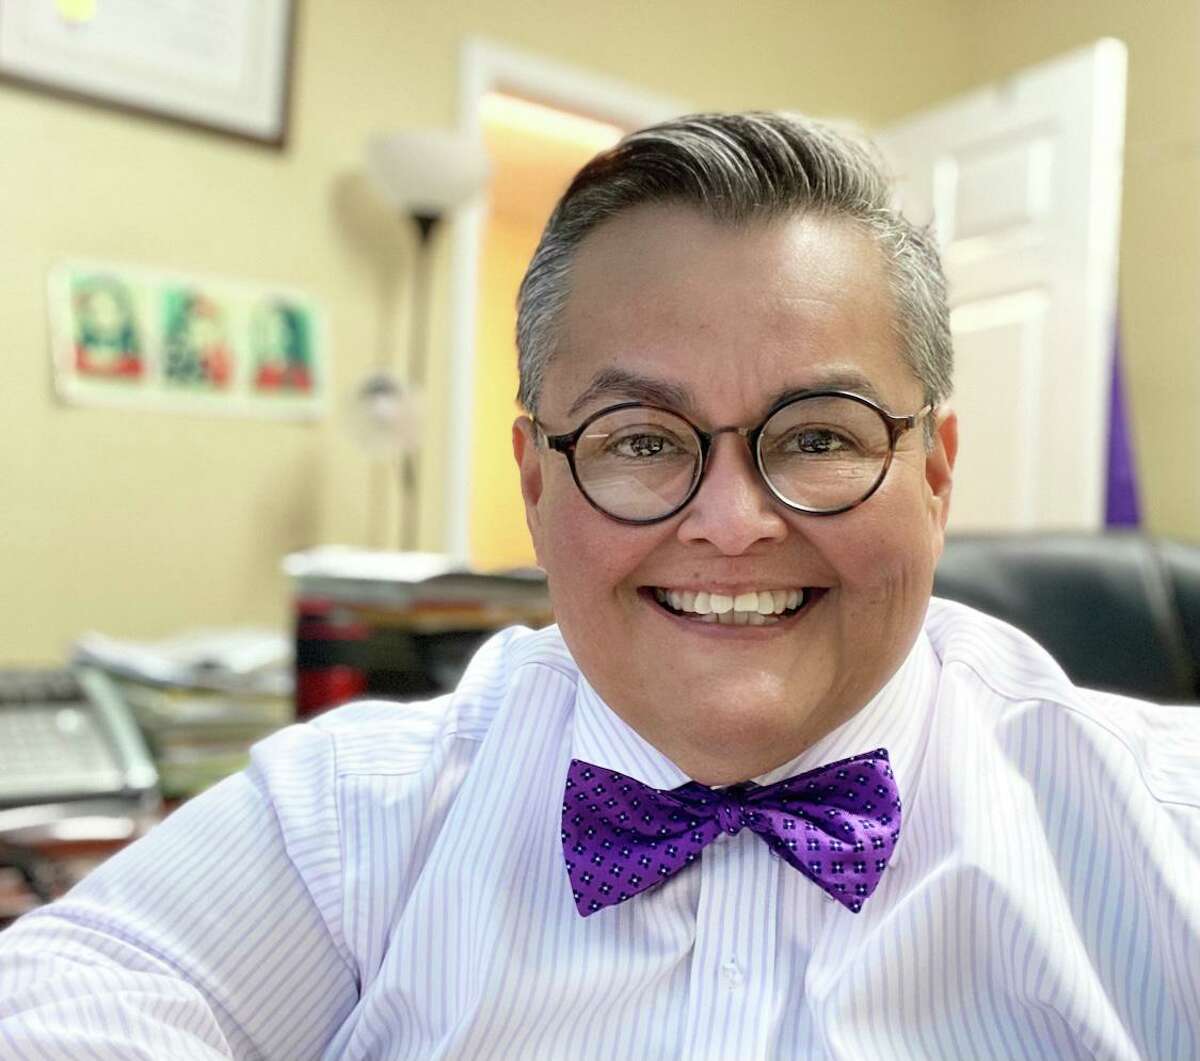 Maria Salazar, a San Antonio attorney and LGBTQ activist, has been recognized by Honor 41, a national nonprofit that maintains an online LGBTQ honor roll. The number 41 is often used as a homophobic slur. The nonprofit seeks to dispel the stigma surrounding the number.